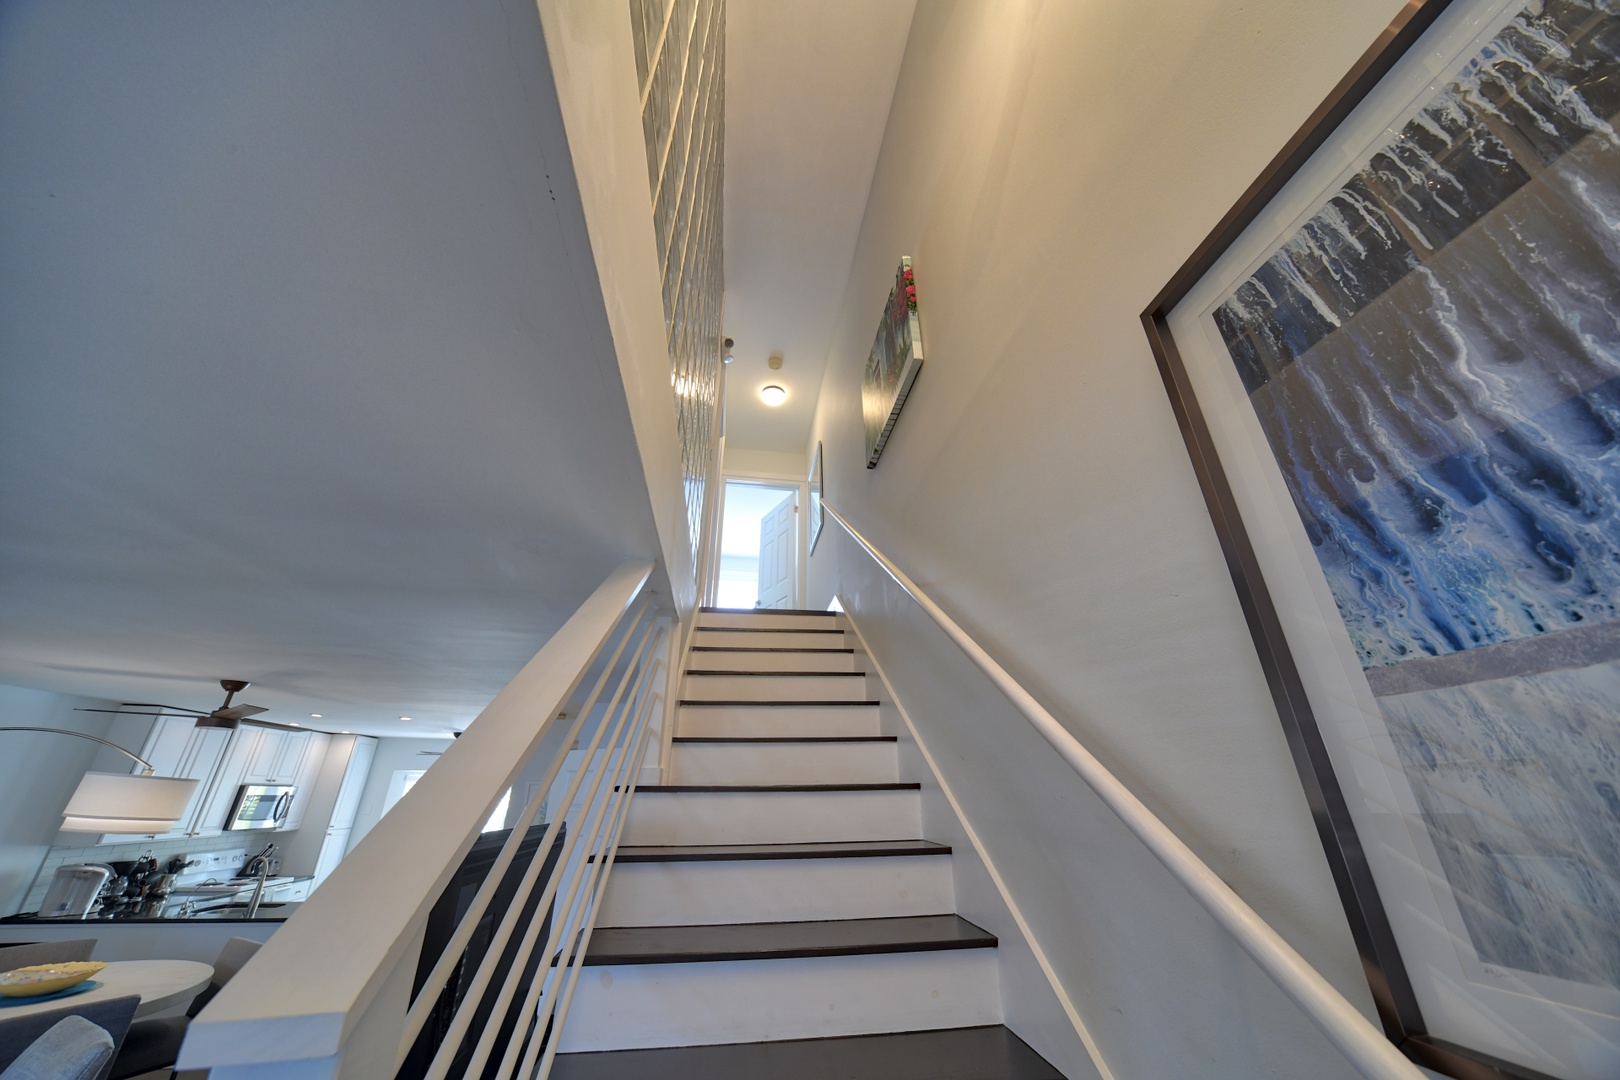 Stairs to 2nd Floor Bedroom Ensuites Villa Serena @ Duval Square Key West